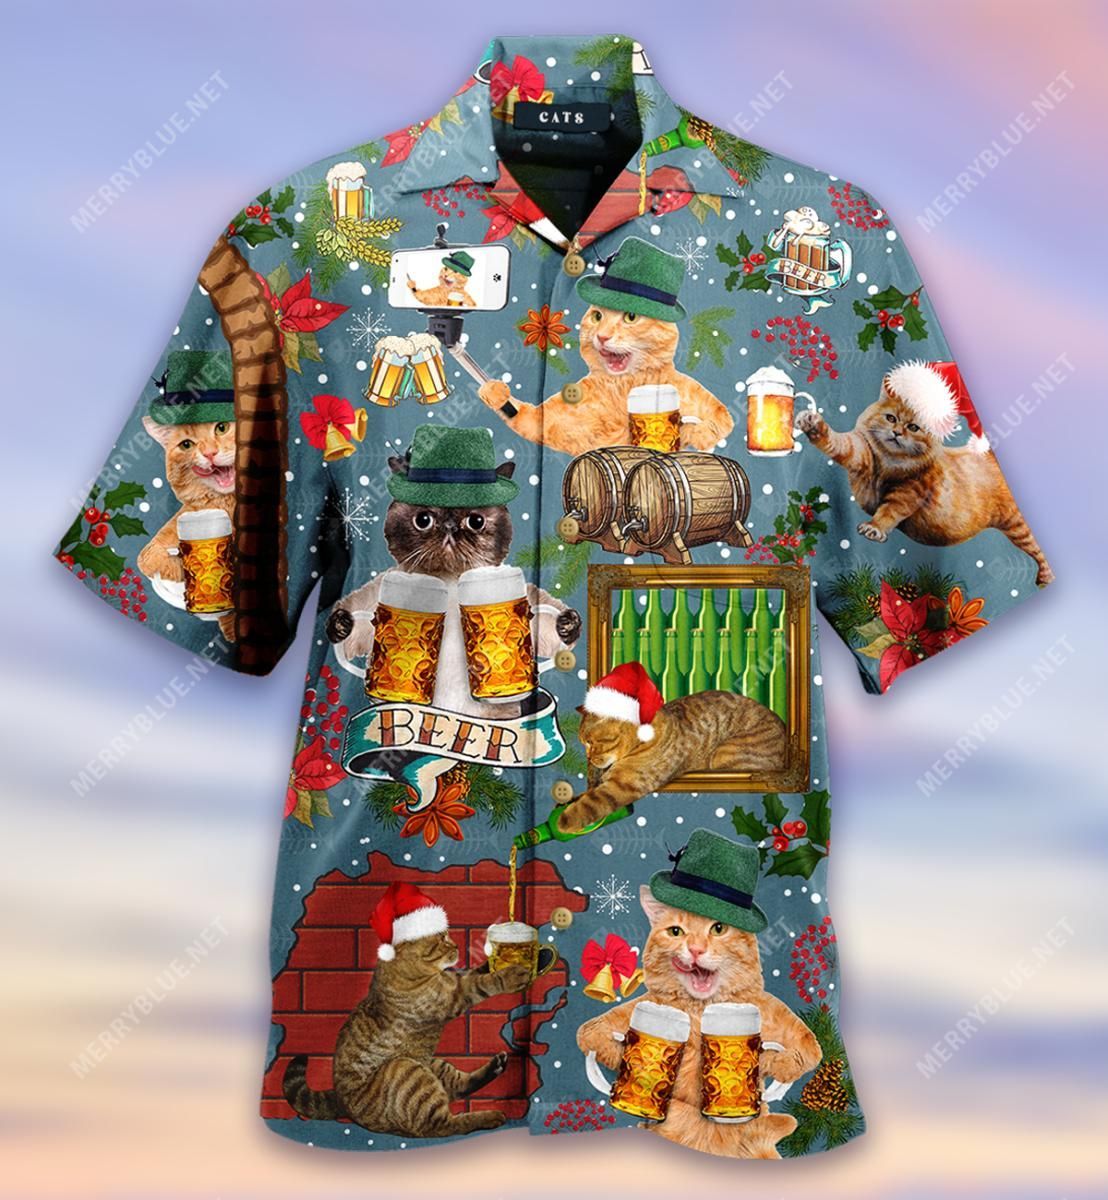 Don'T Let Your Cat Drink Beer Aloha Hawaiian Shirt Colorful Short Sleeve Summer Beach Casual Shirt For Men And Women